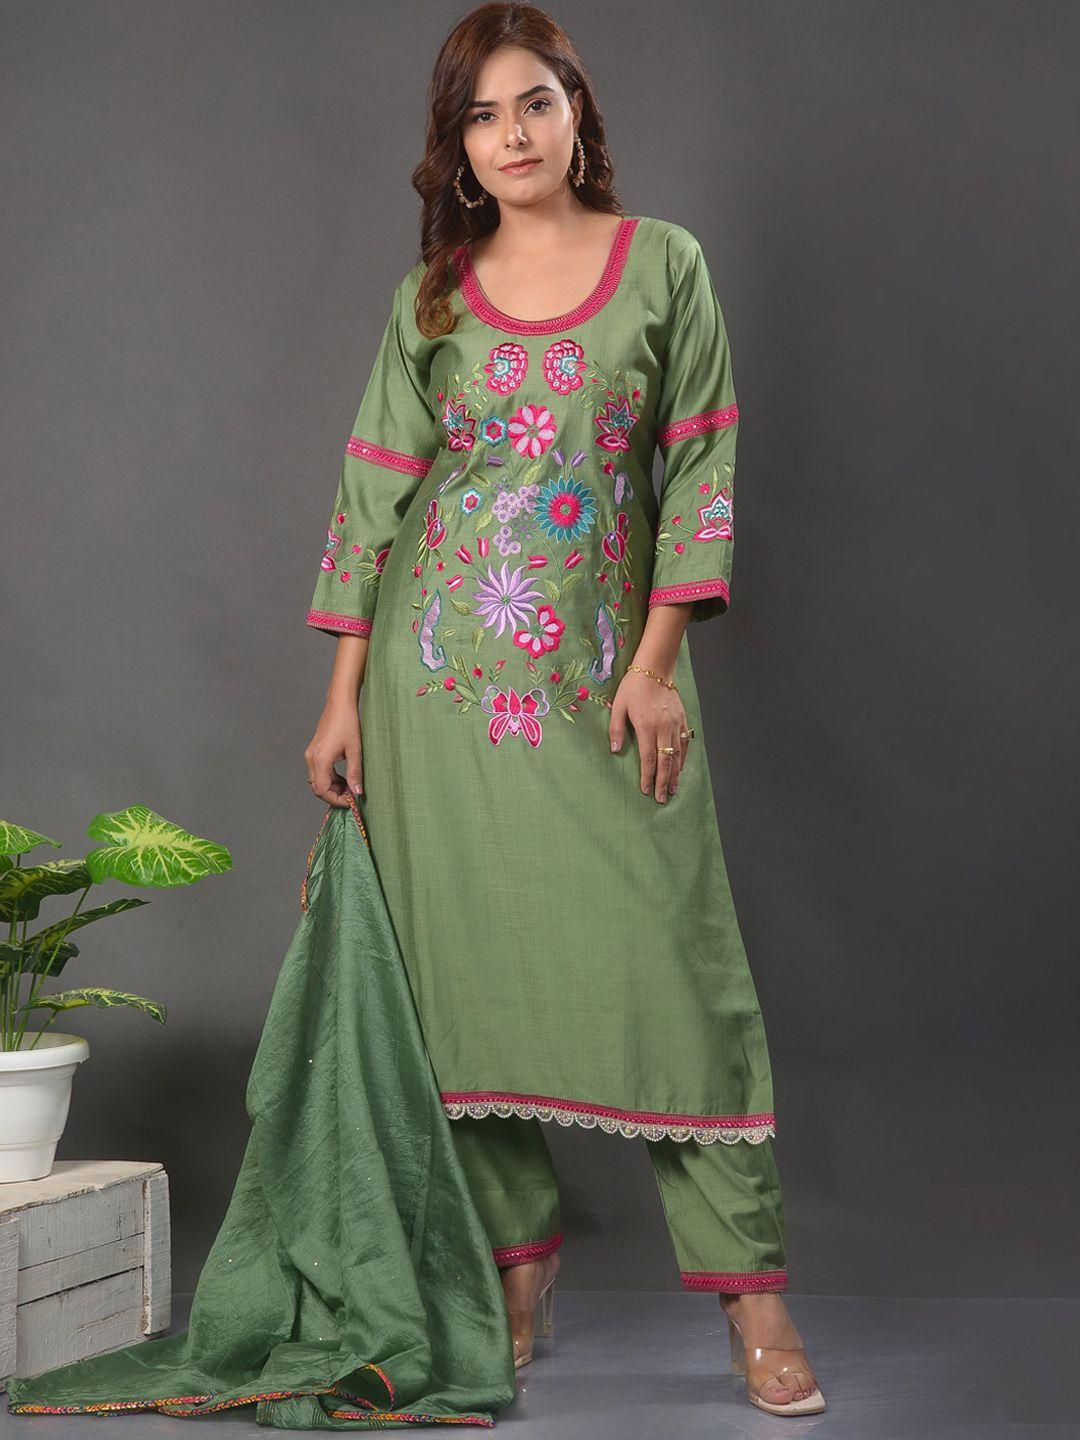 clora creation women olive green floral embroidered regular kurta with palazzos & with dupatta